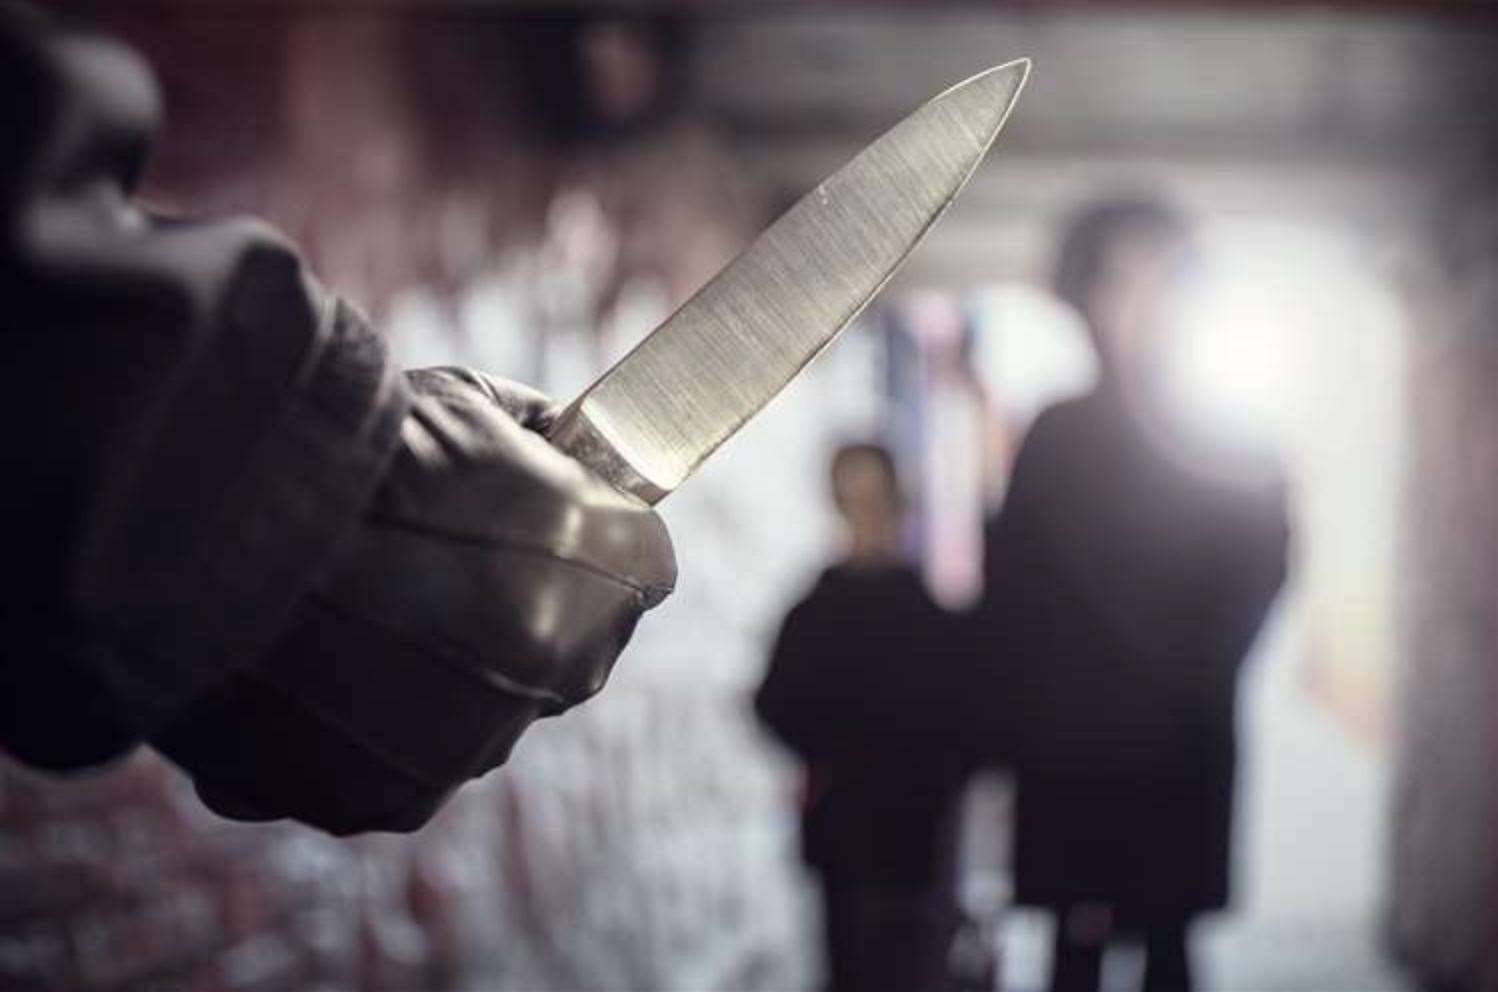 A campaign has been launched to raise awareness of knife crime